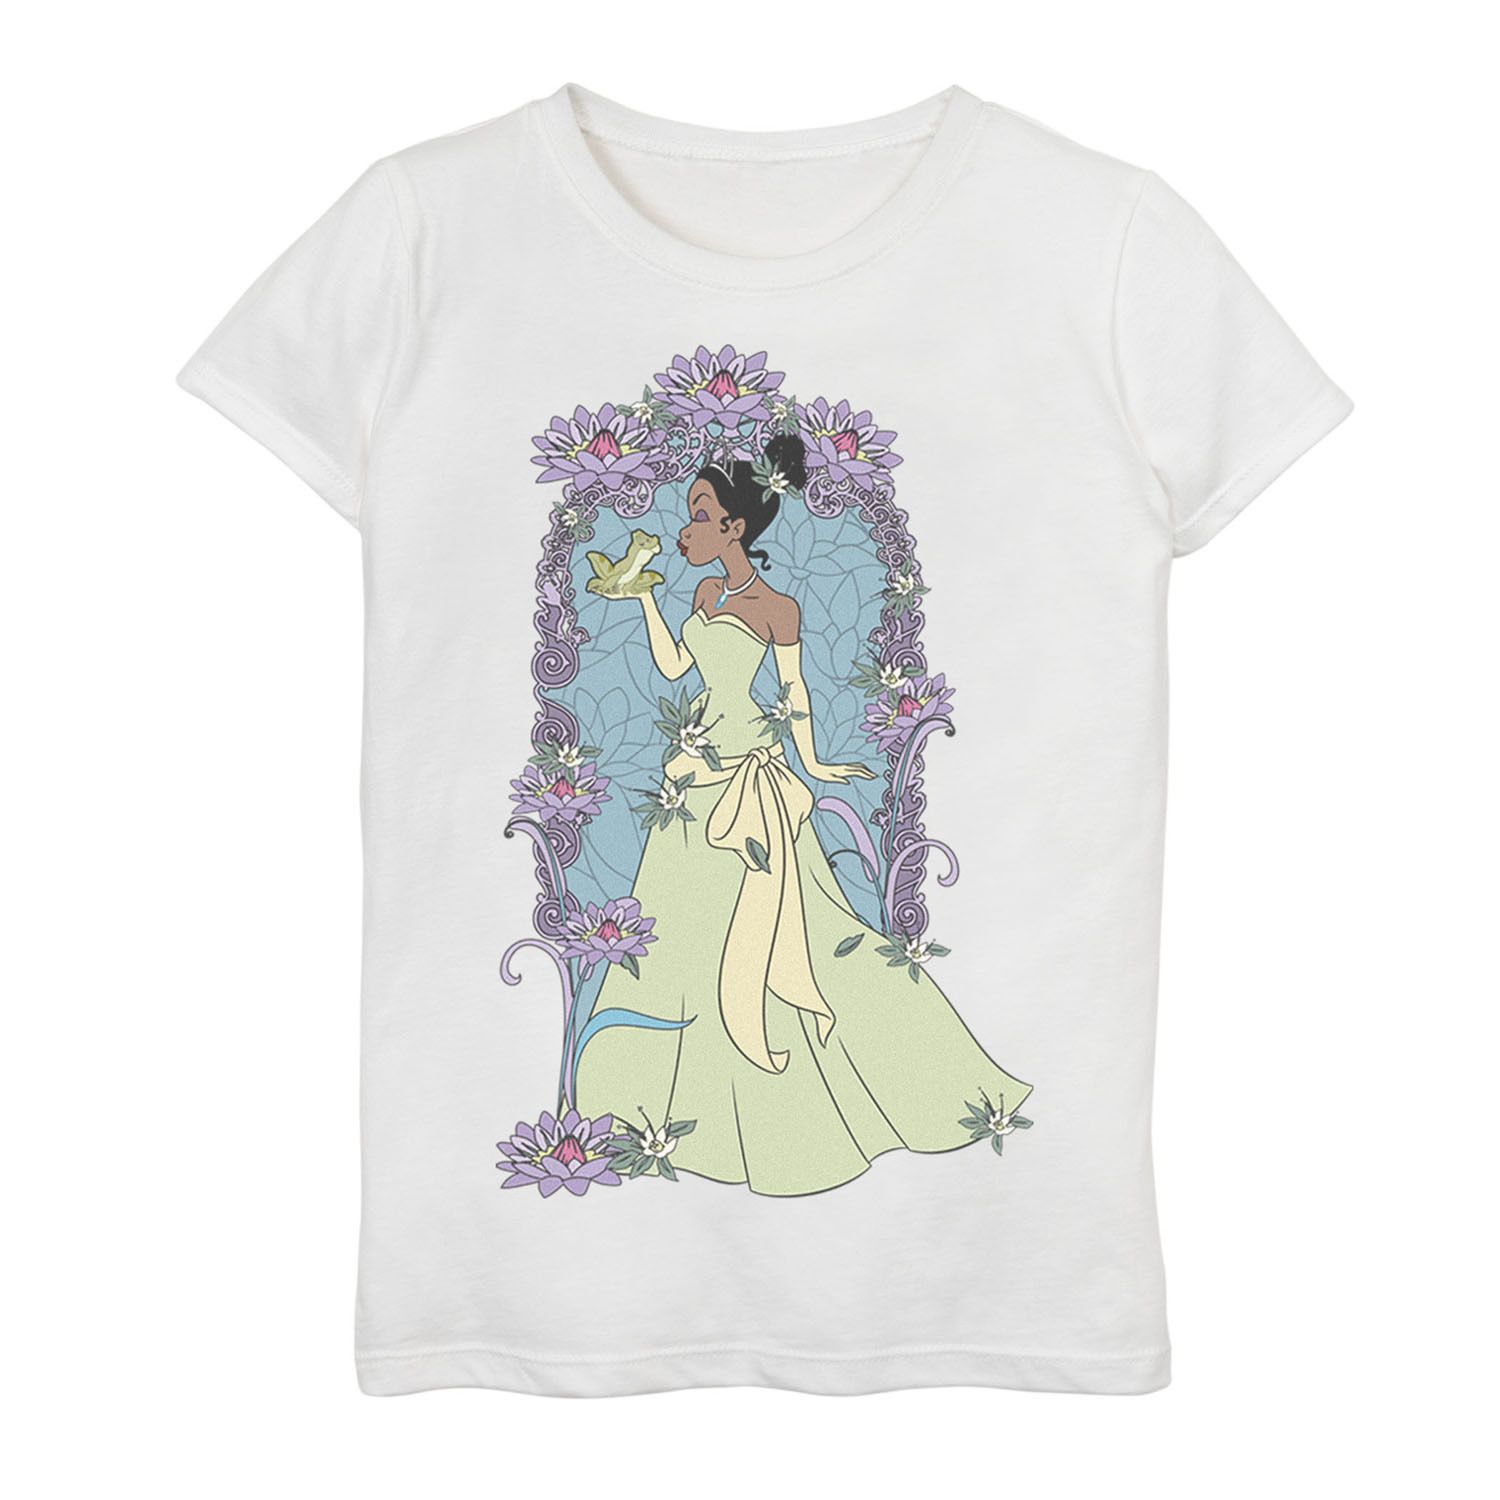 Image for Disney Girls 7-16 Princess And The Frog Tiana Floral Kiss Graphic Tee at Kohl's.